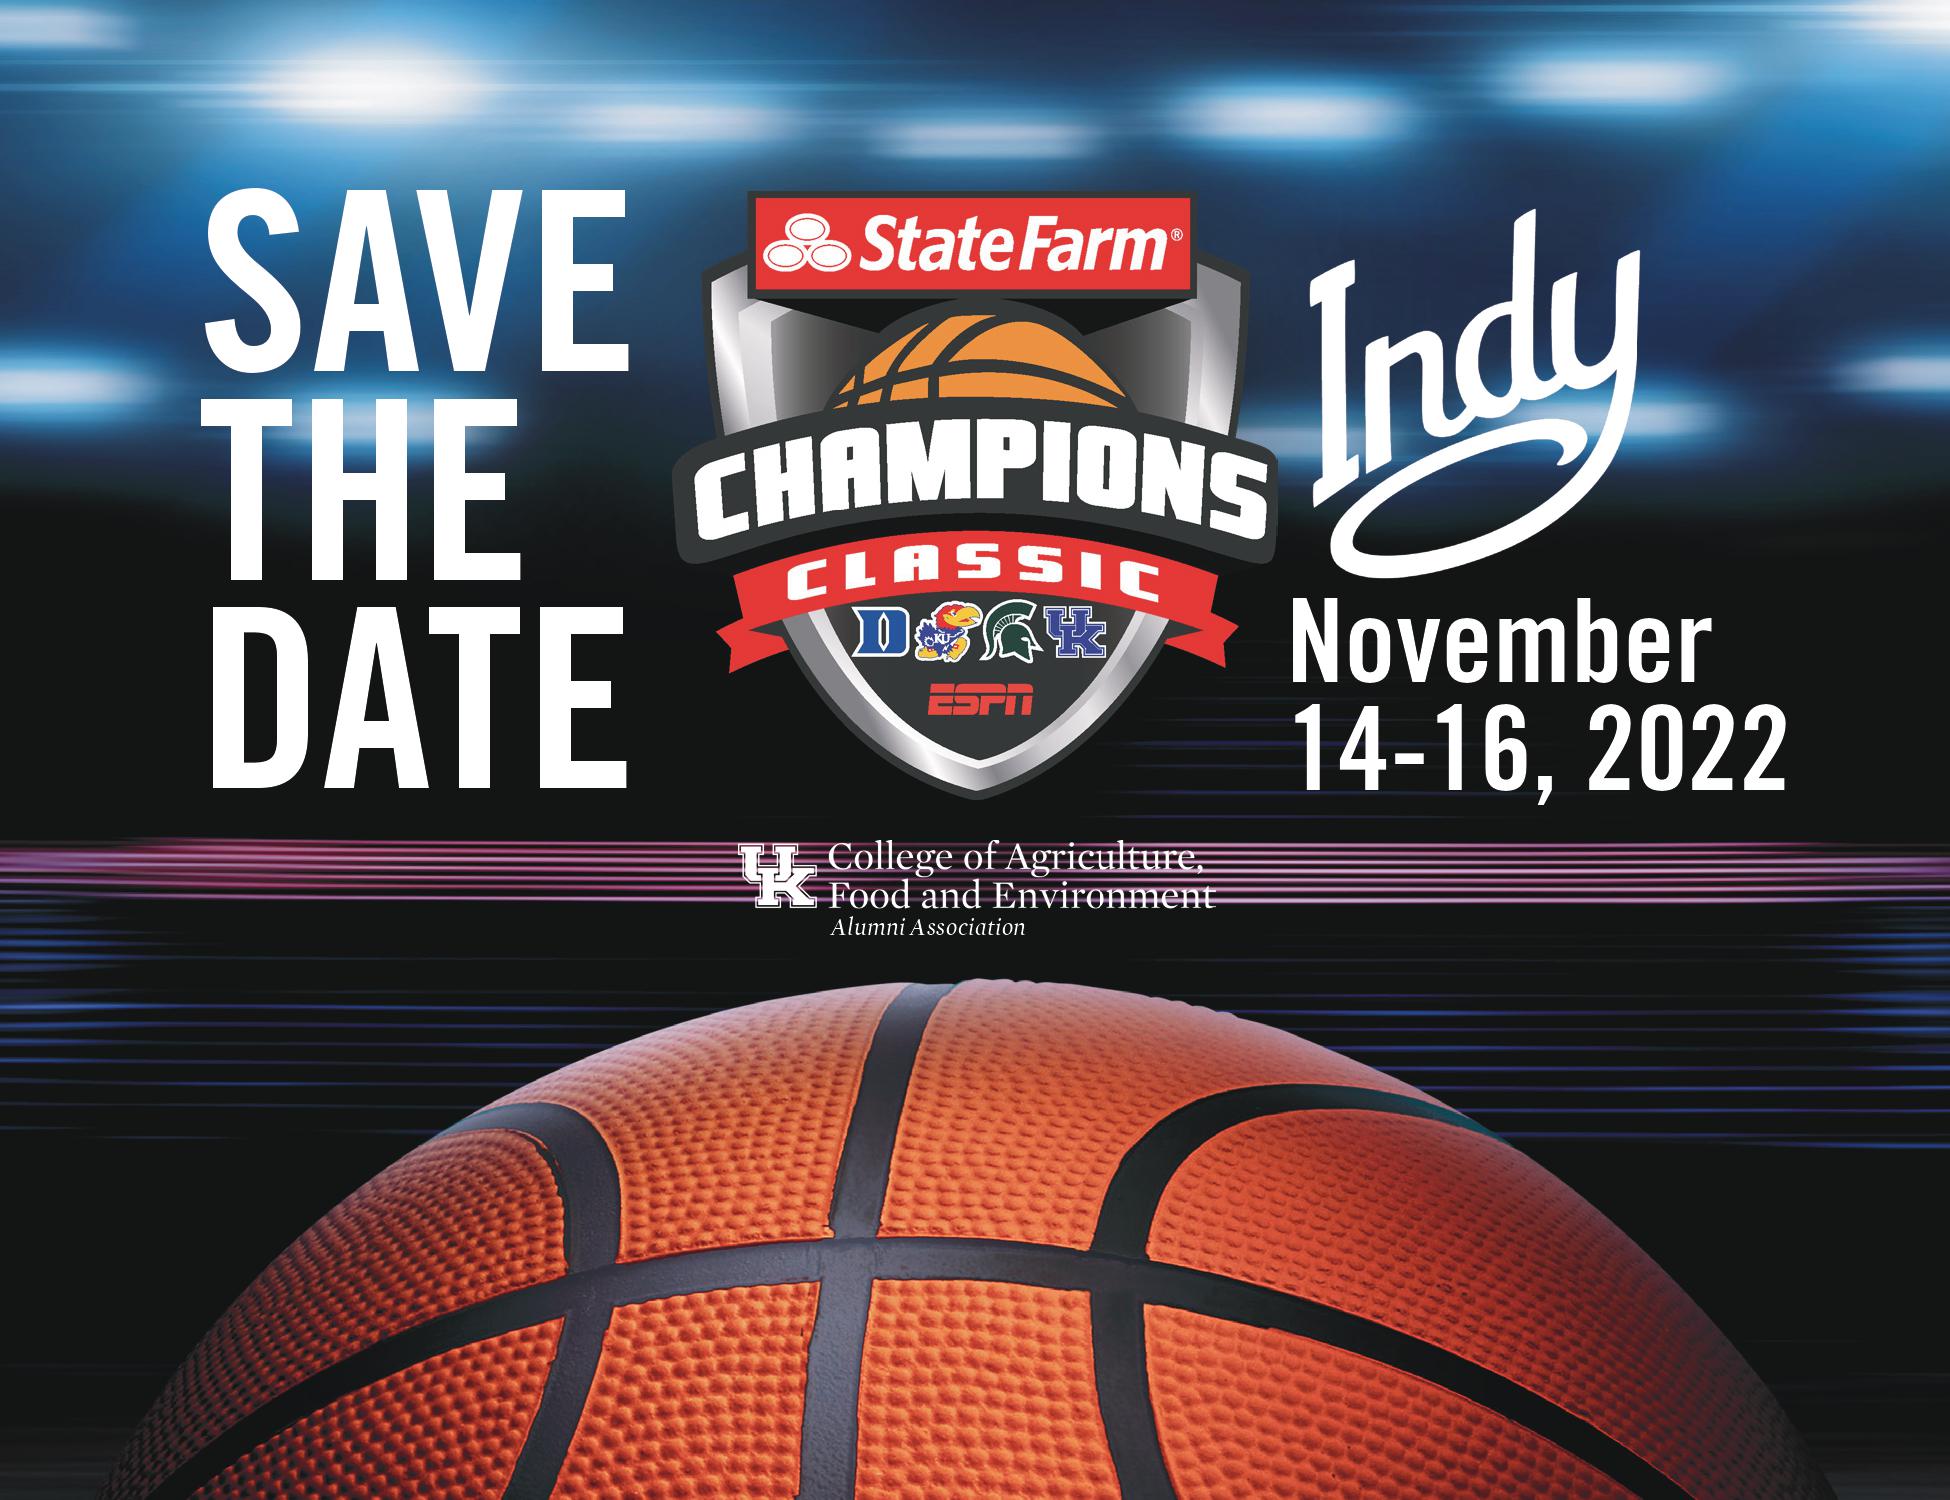 Save the Date Champions Classic Indy November 14-16, 2022